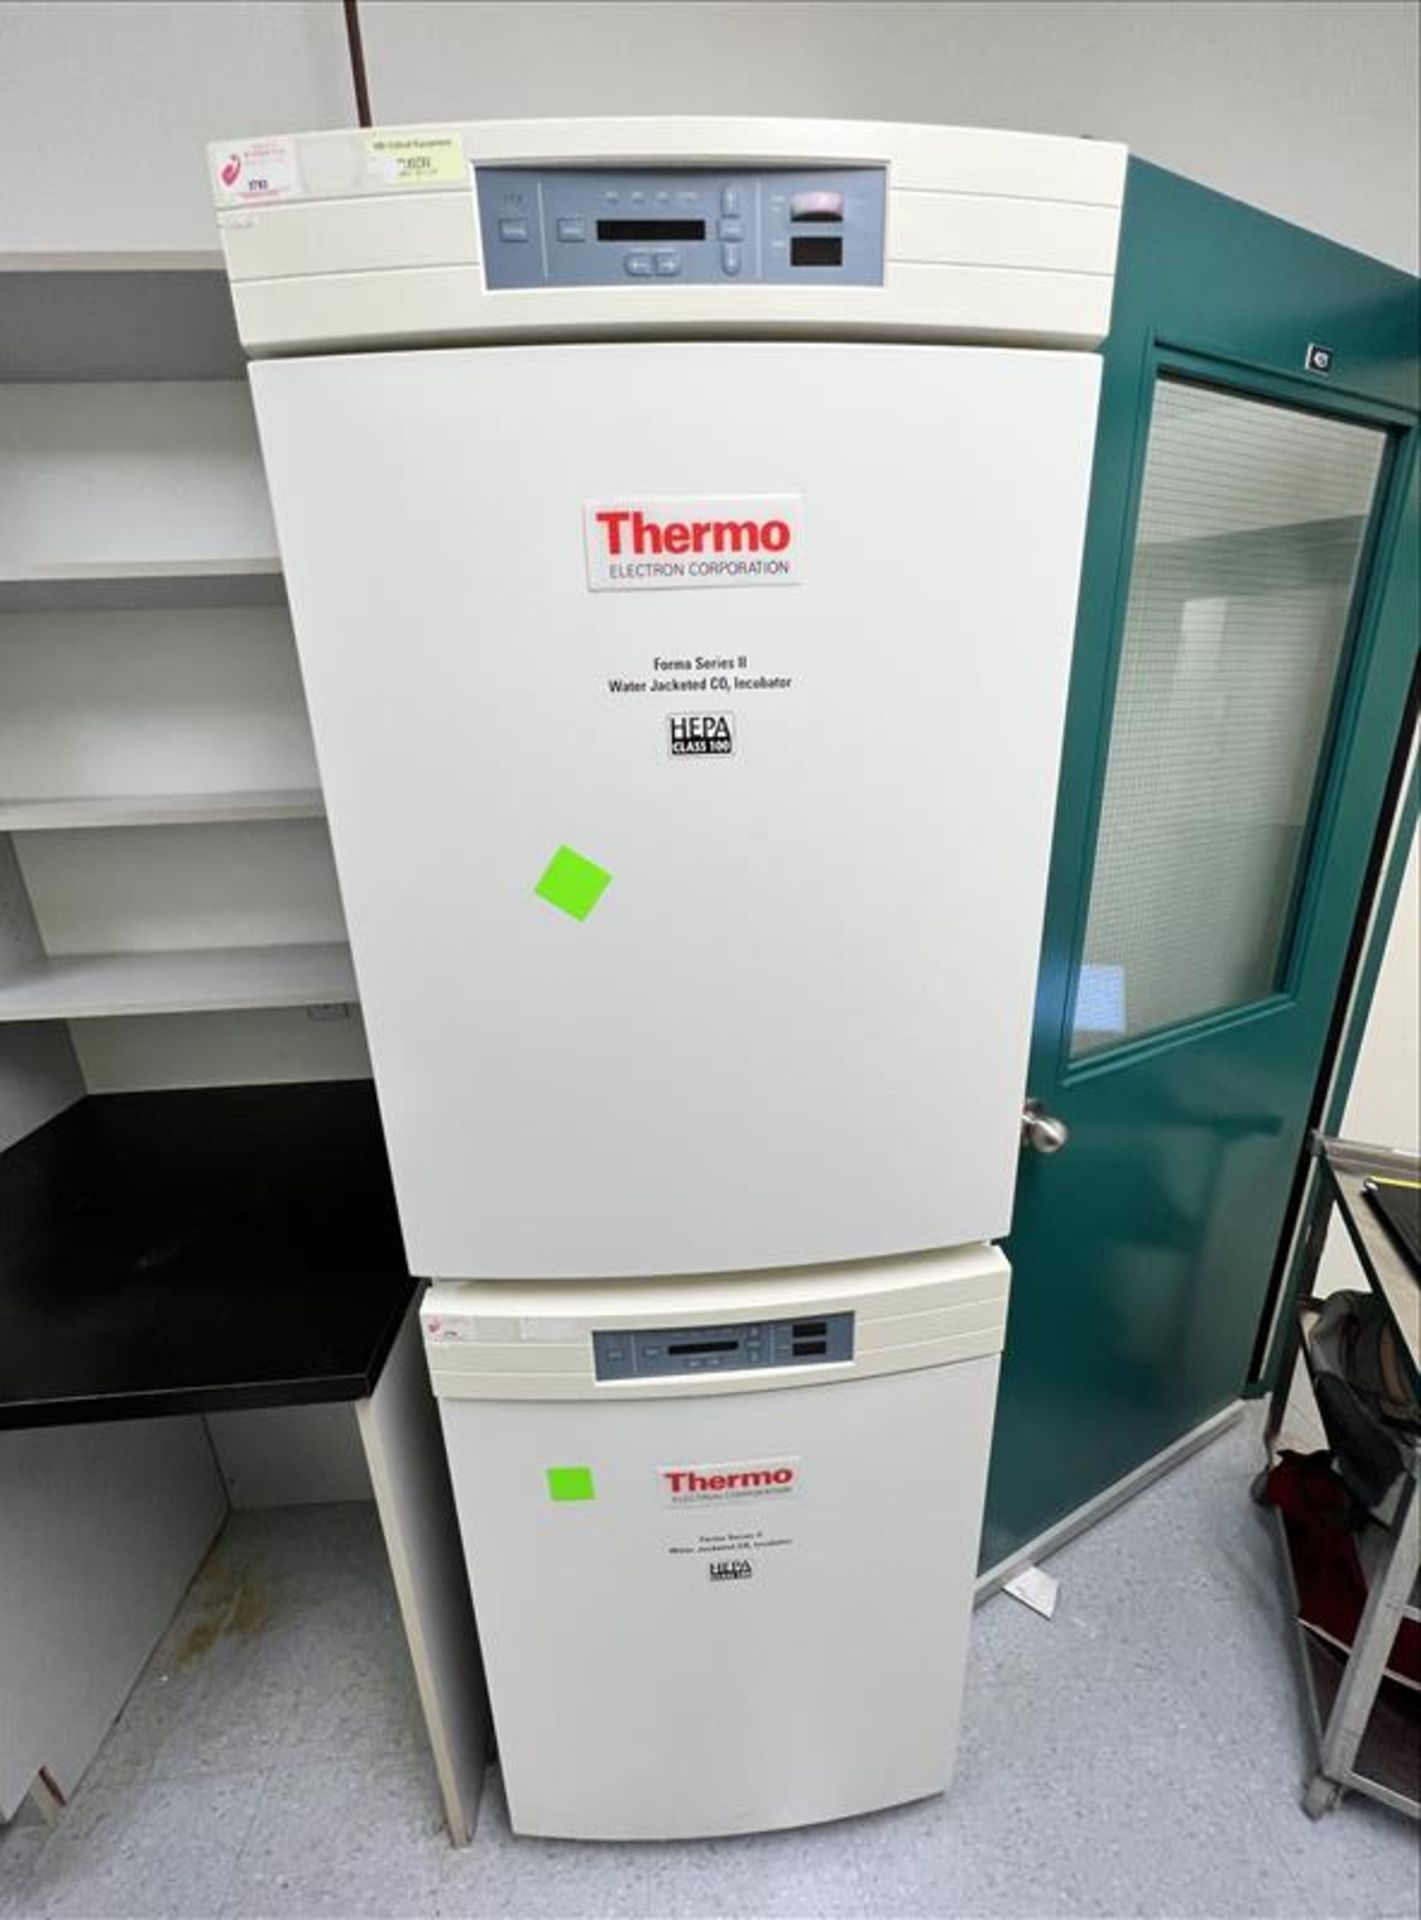 Thermo Electron Double Stack Water Jacketed CO2 Incubator mod. 3110 S/N 304596-27339